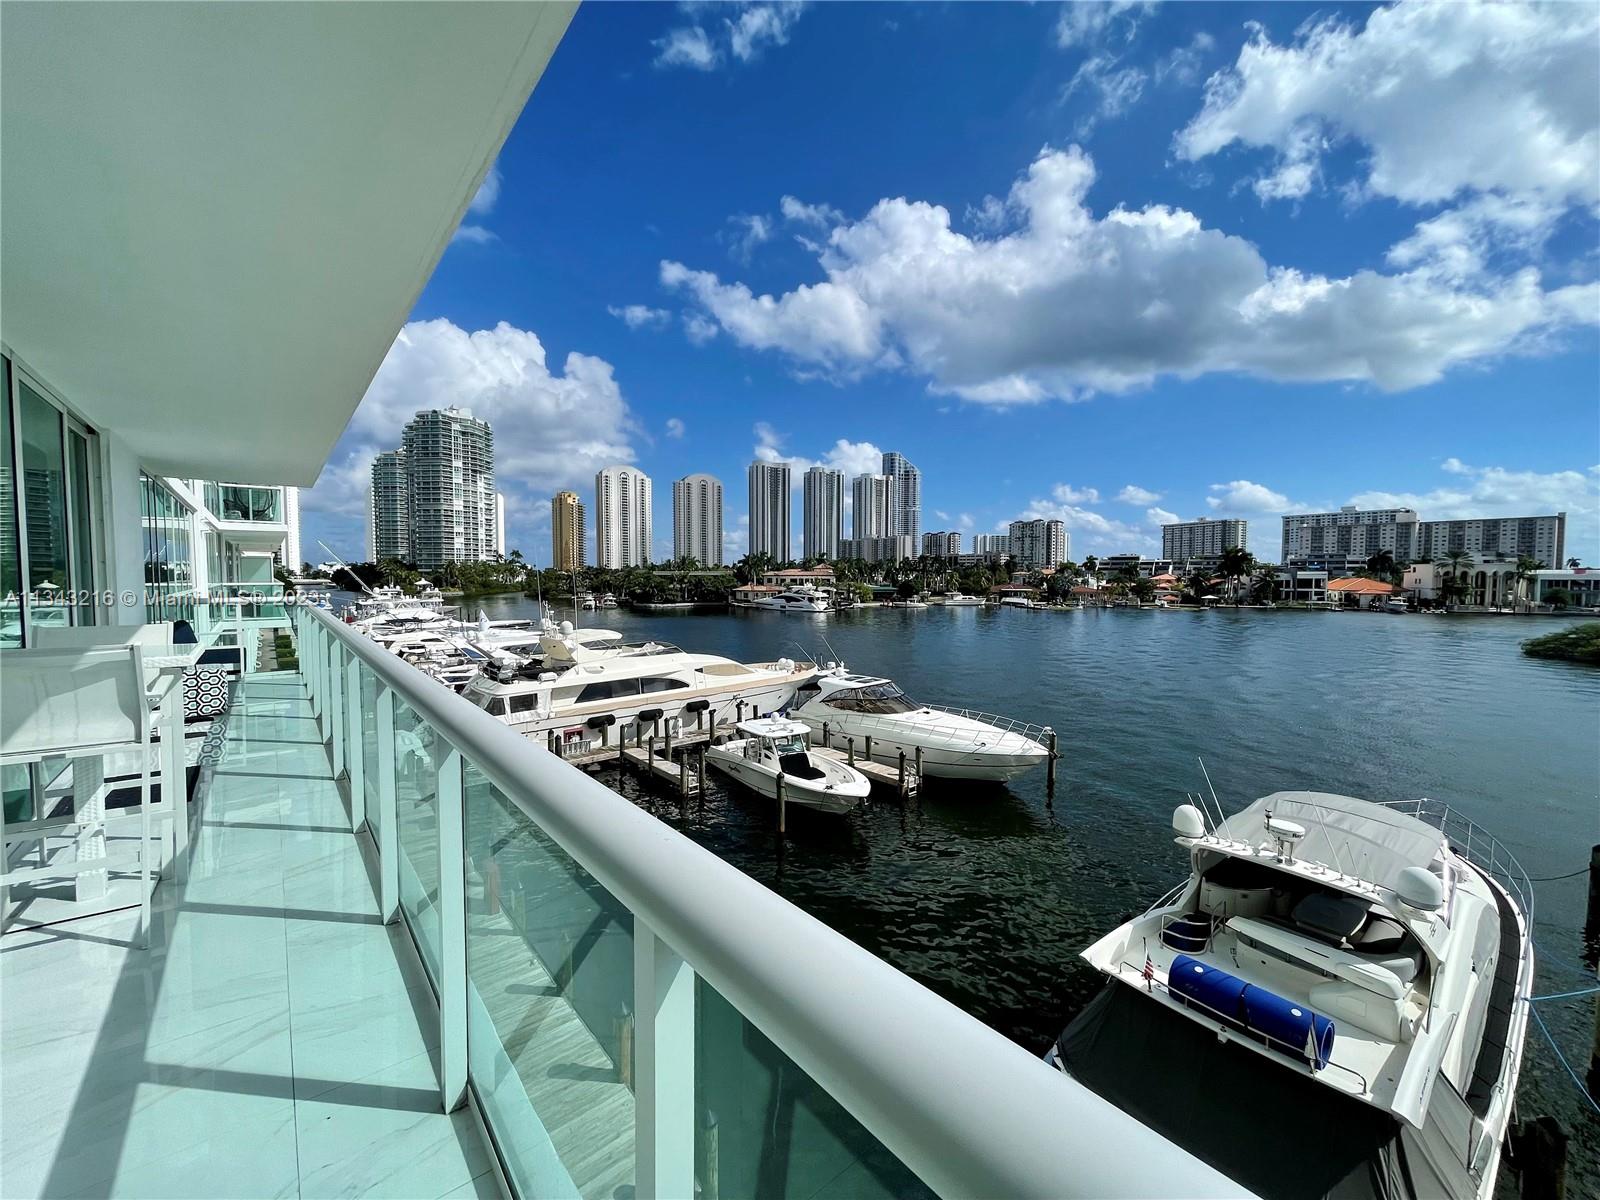 GREAT OPPORTUNITY to rent this fabulous 3 Bed/2.5 Bath fully furnished unit in the luxurious 400 Sunny Isles West Tower! Unobstructed Intracoastal, Ocean and City views, custom closets, window treatments, high tech eco-friendly kitchen with premium European appliances and 1 parking spot on the same floor. 400 Sunny Isles offers resort style amenities such as a rooftop pool & cabanas overlooking the intercoastal, gym, sauna, steam room, tennis court, valet parking, bike storage and more. Just blocks to the beach, houses of worship, parks, and restaurants. Available for rentals up to 6 months.